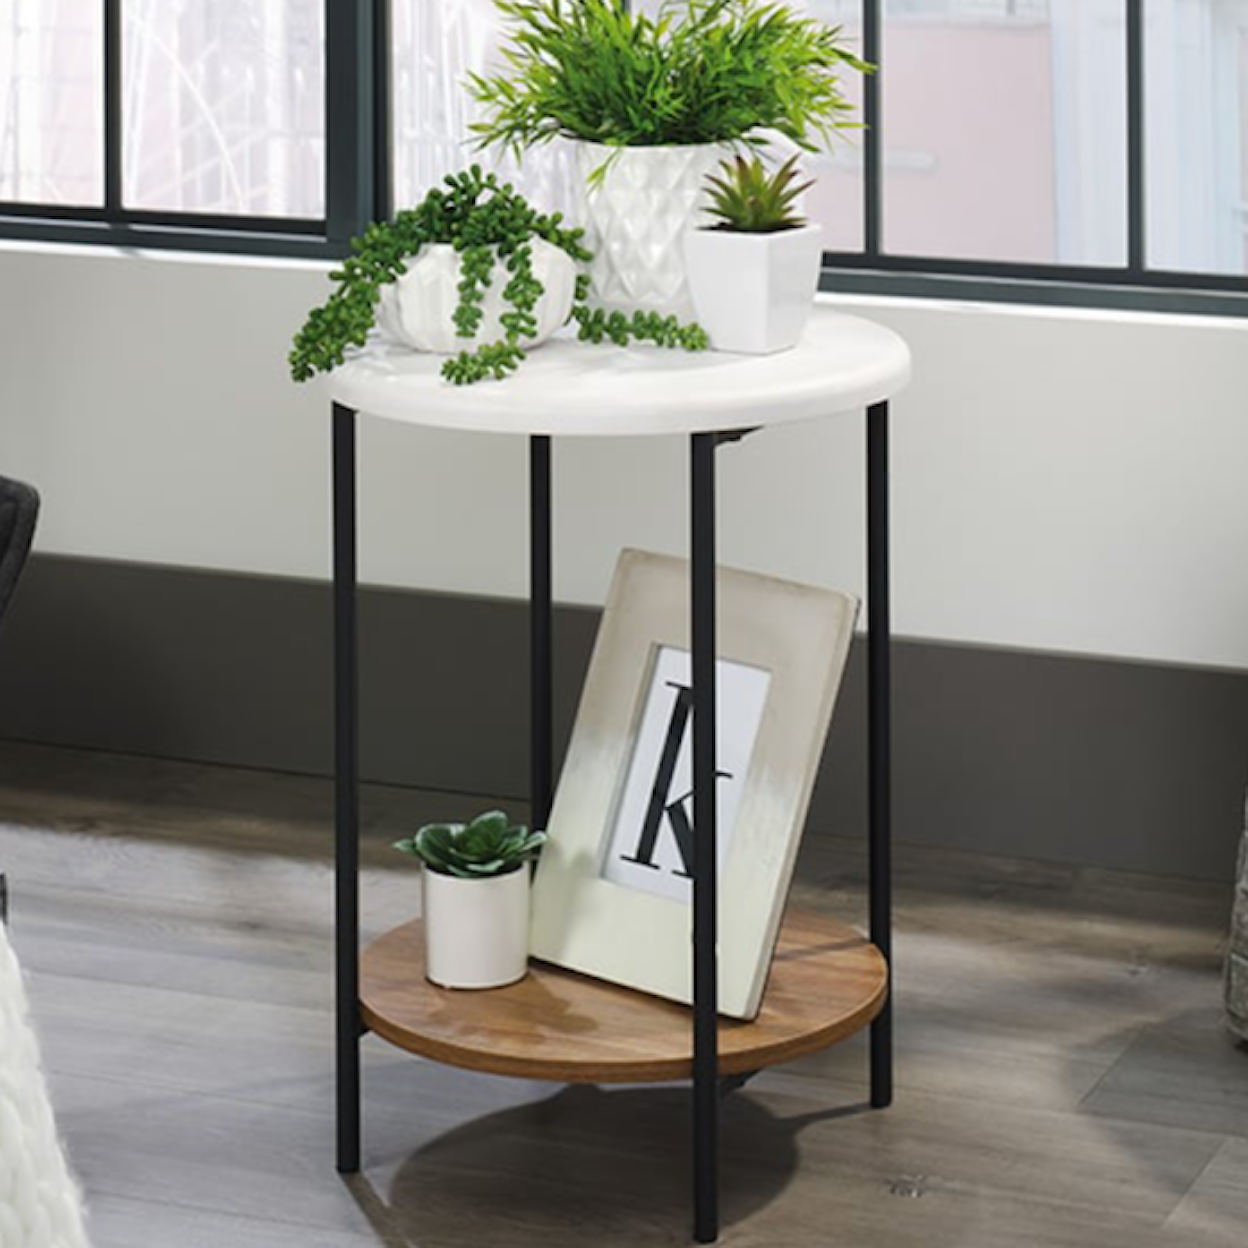 Sauder Tremont Row Side Table